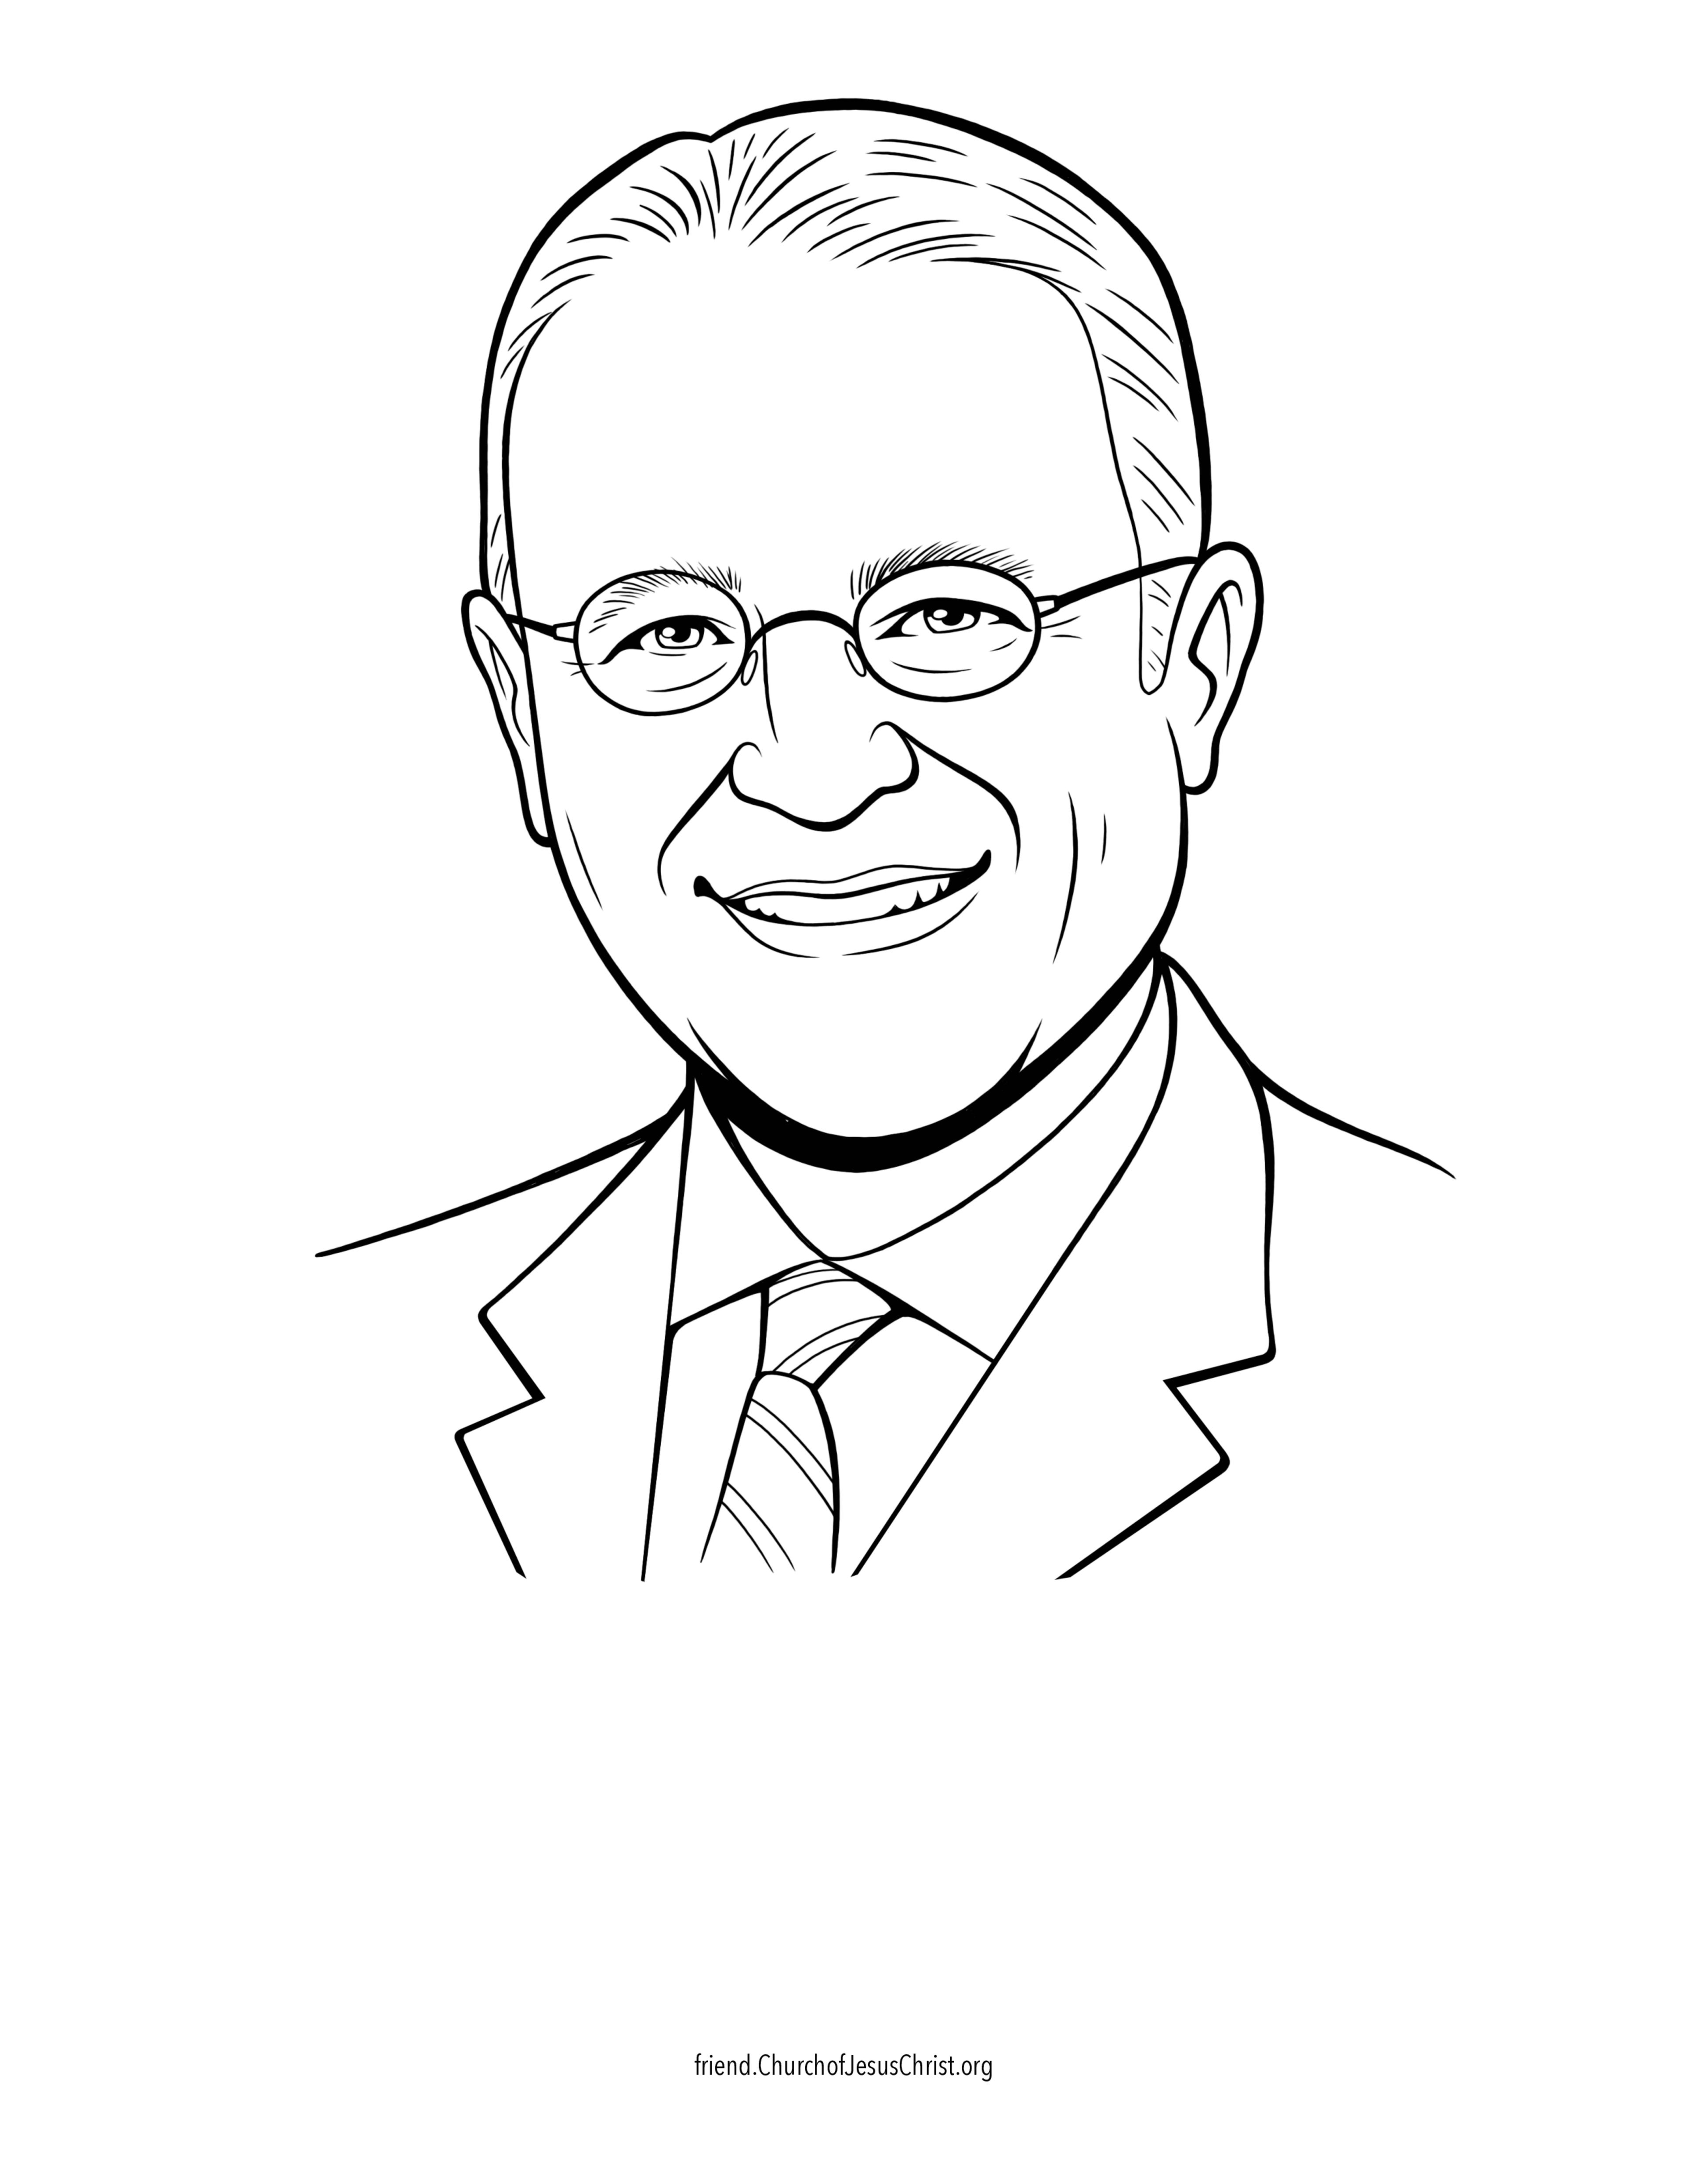 A coloring page of the official portrait of Ulisses Soares.